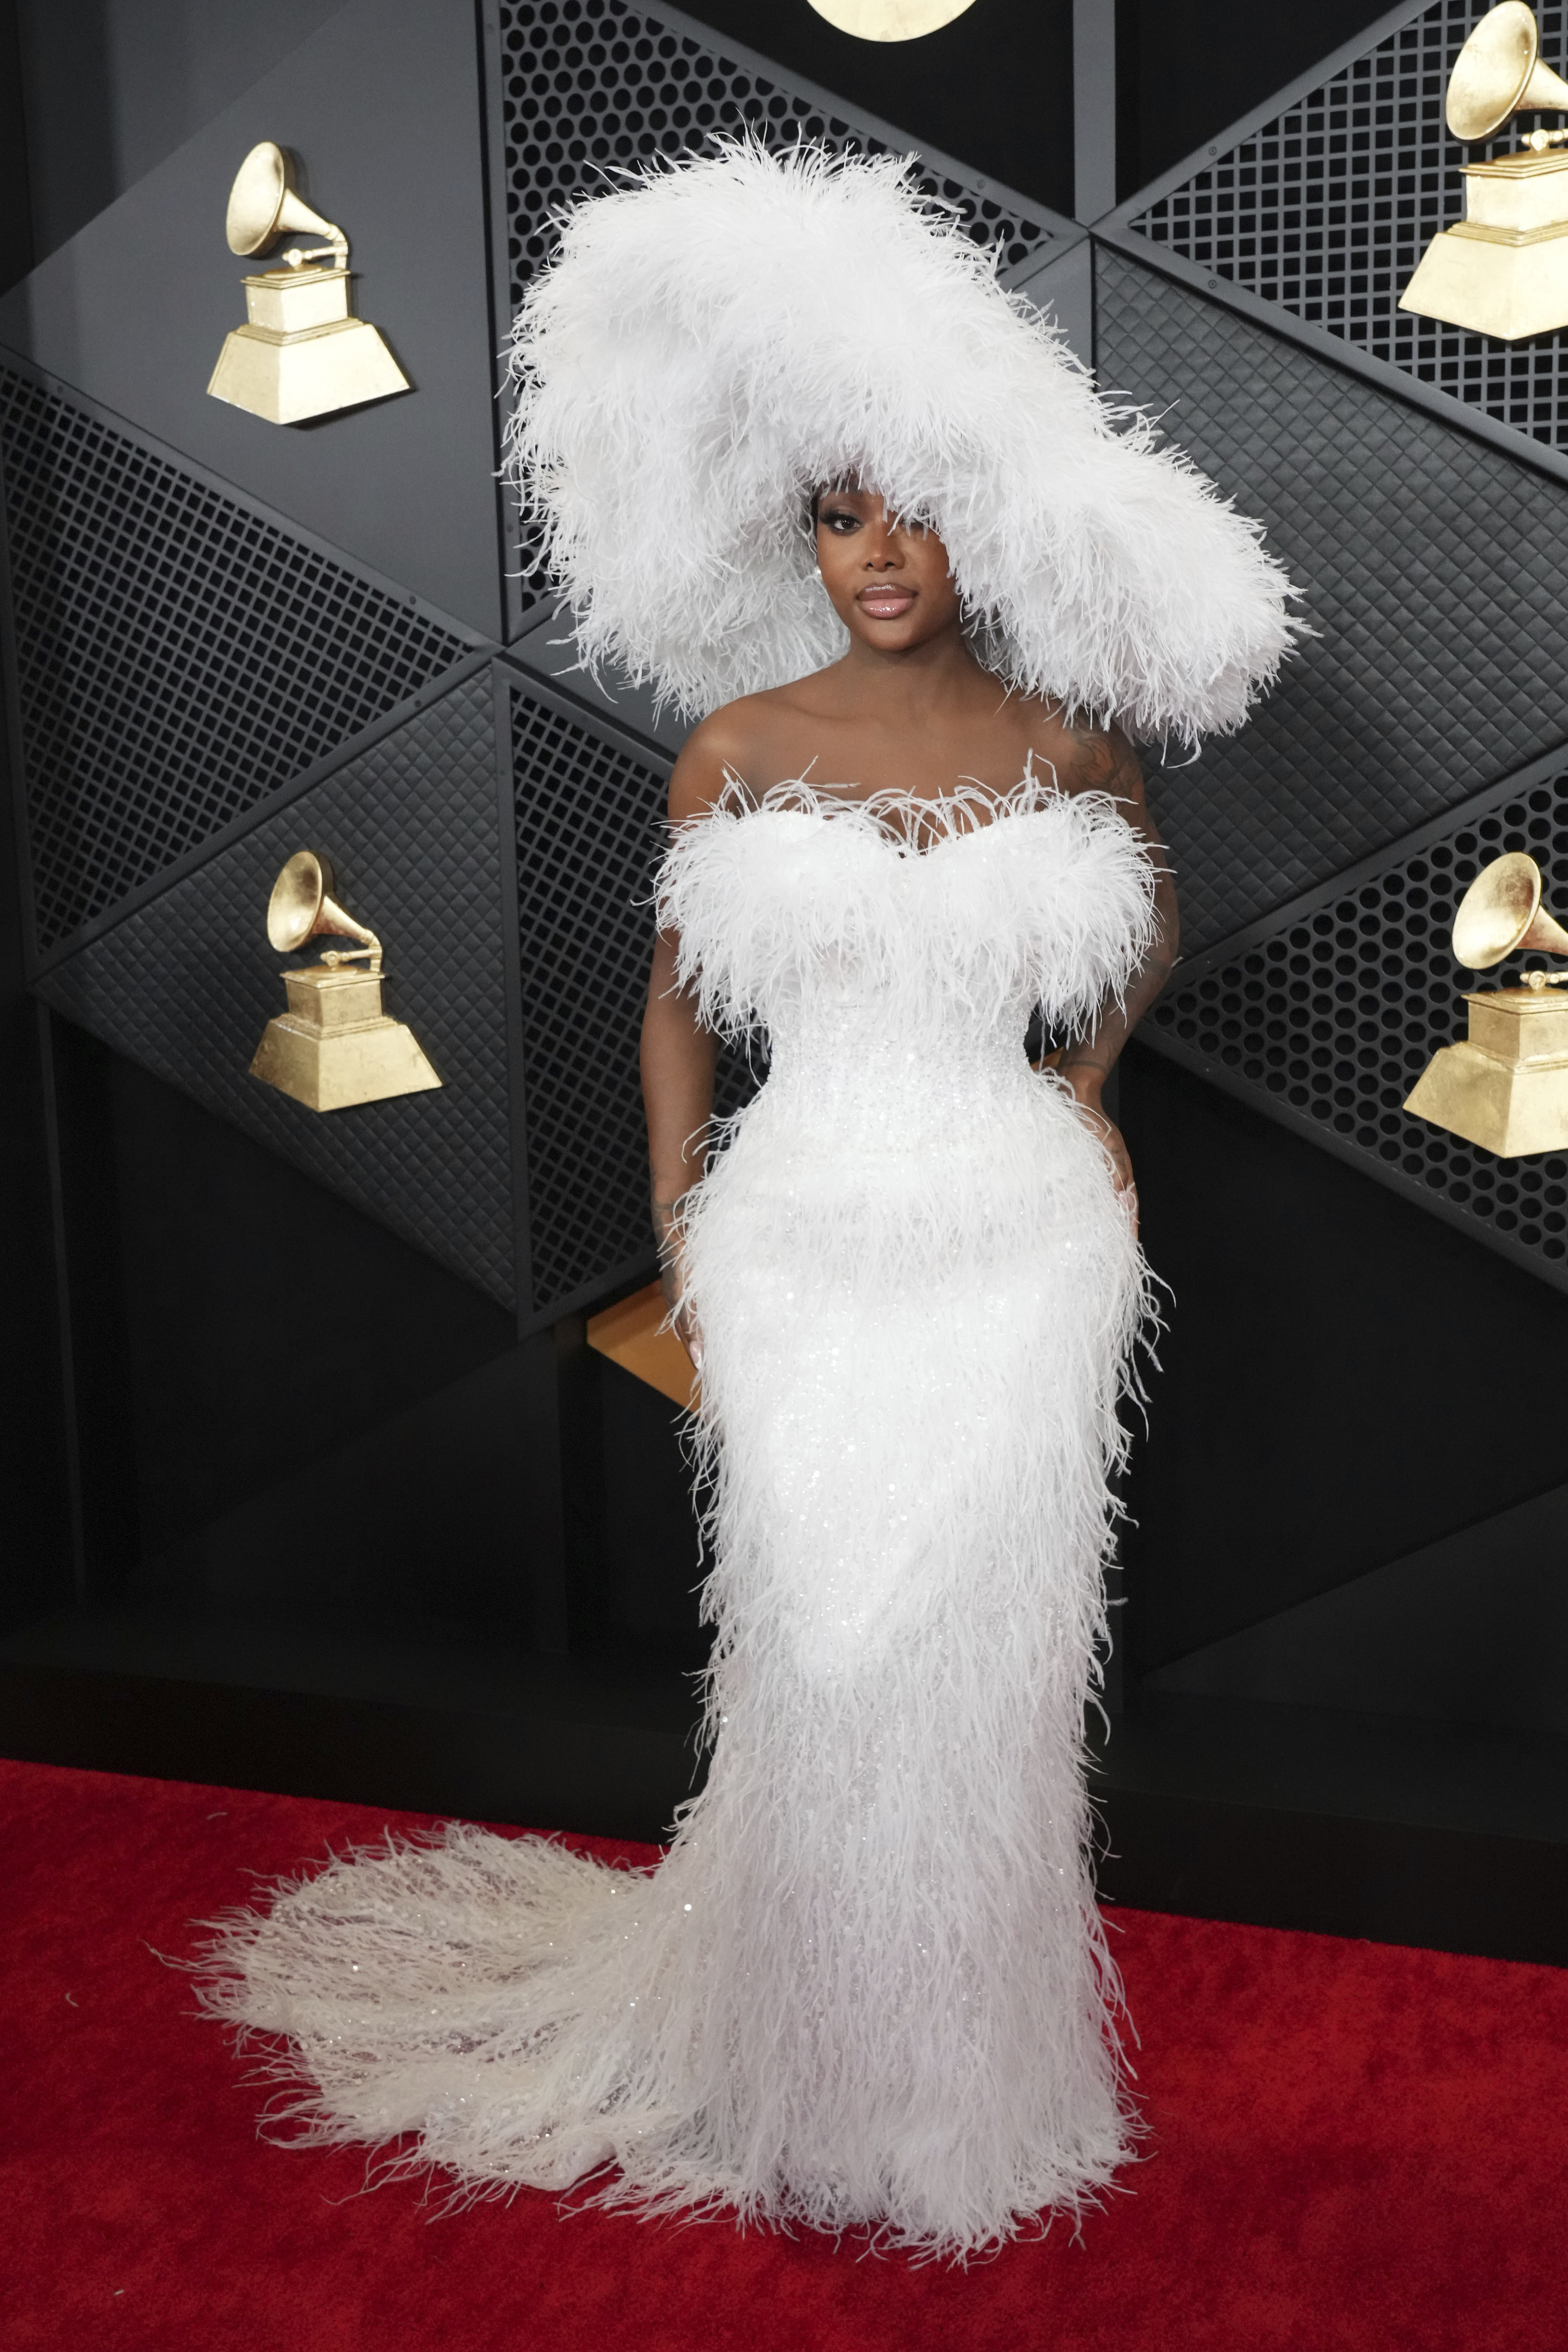 Summer Walker wearing a tight, white strapless gown with fluffy feathery fabric and a massive matching fluffy hat